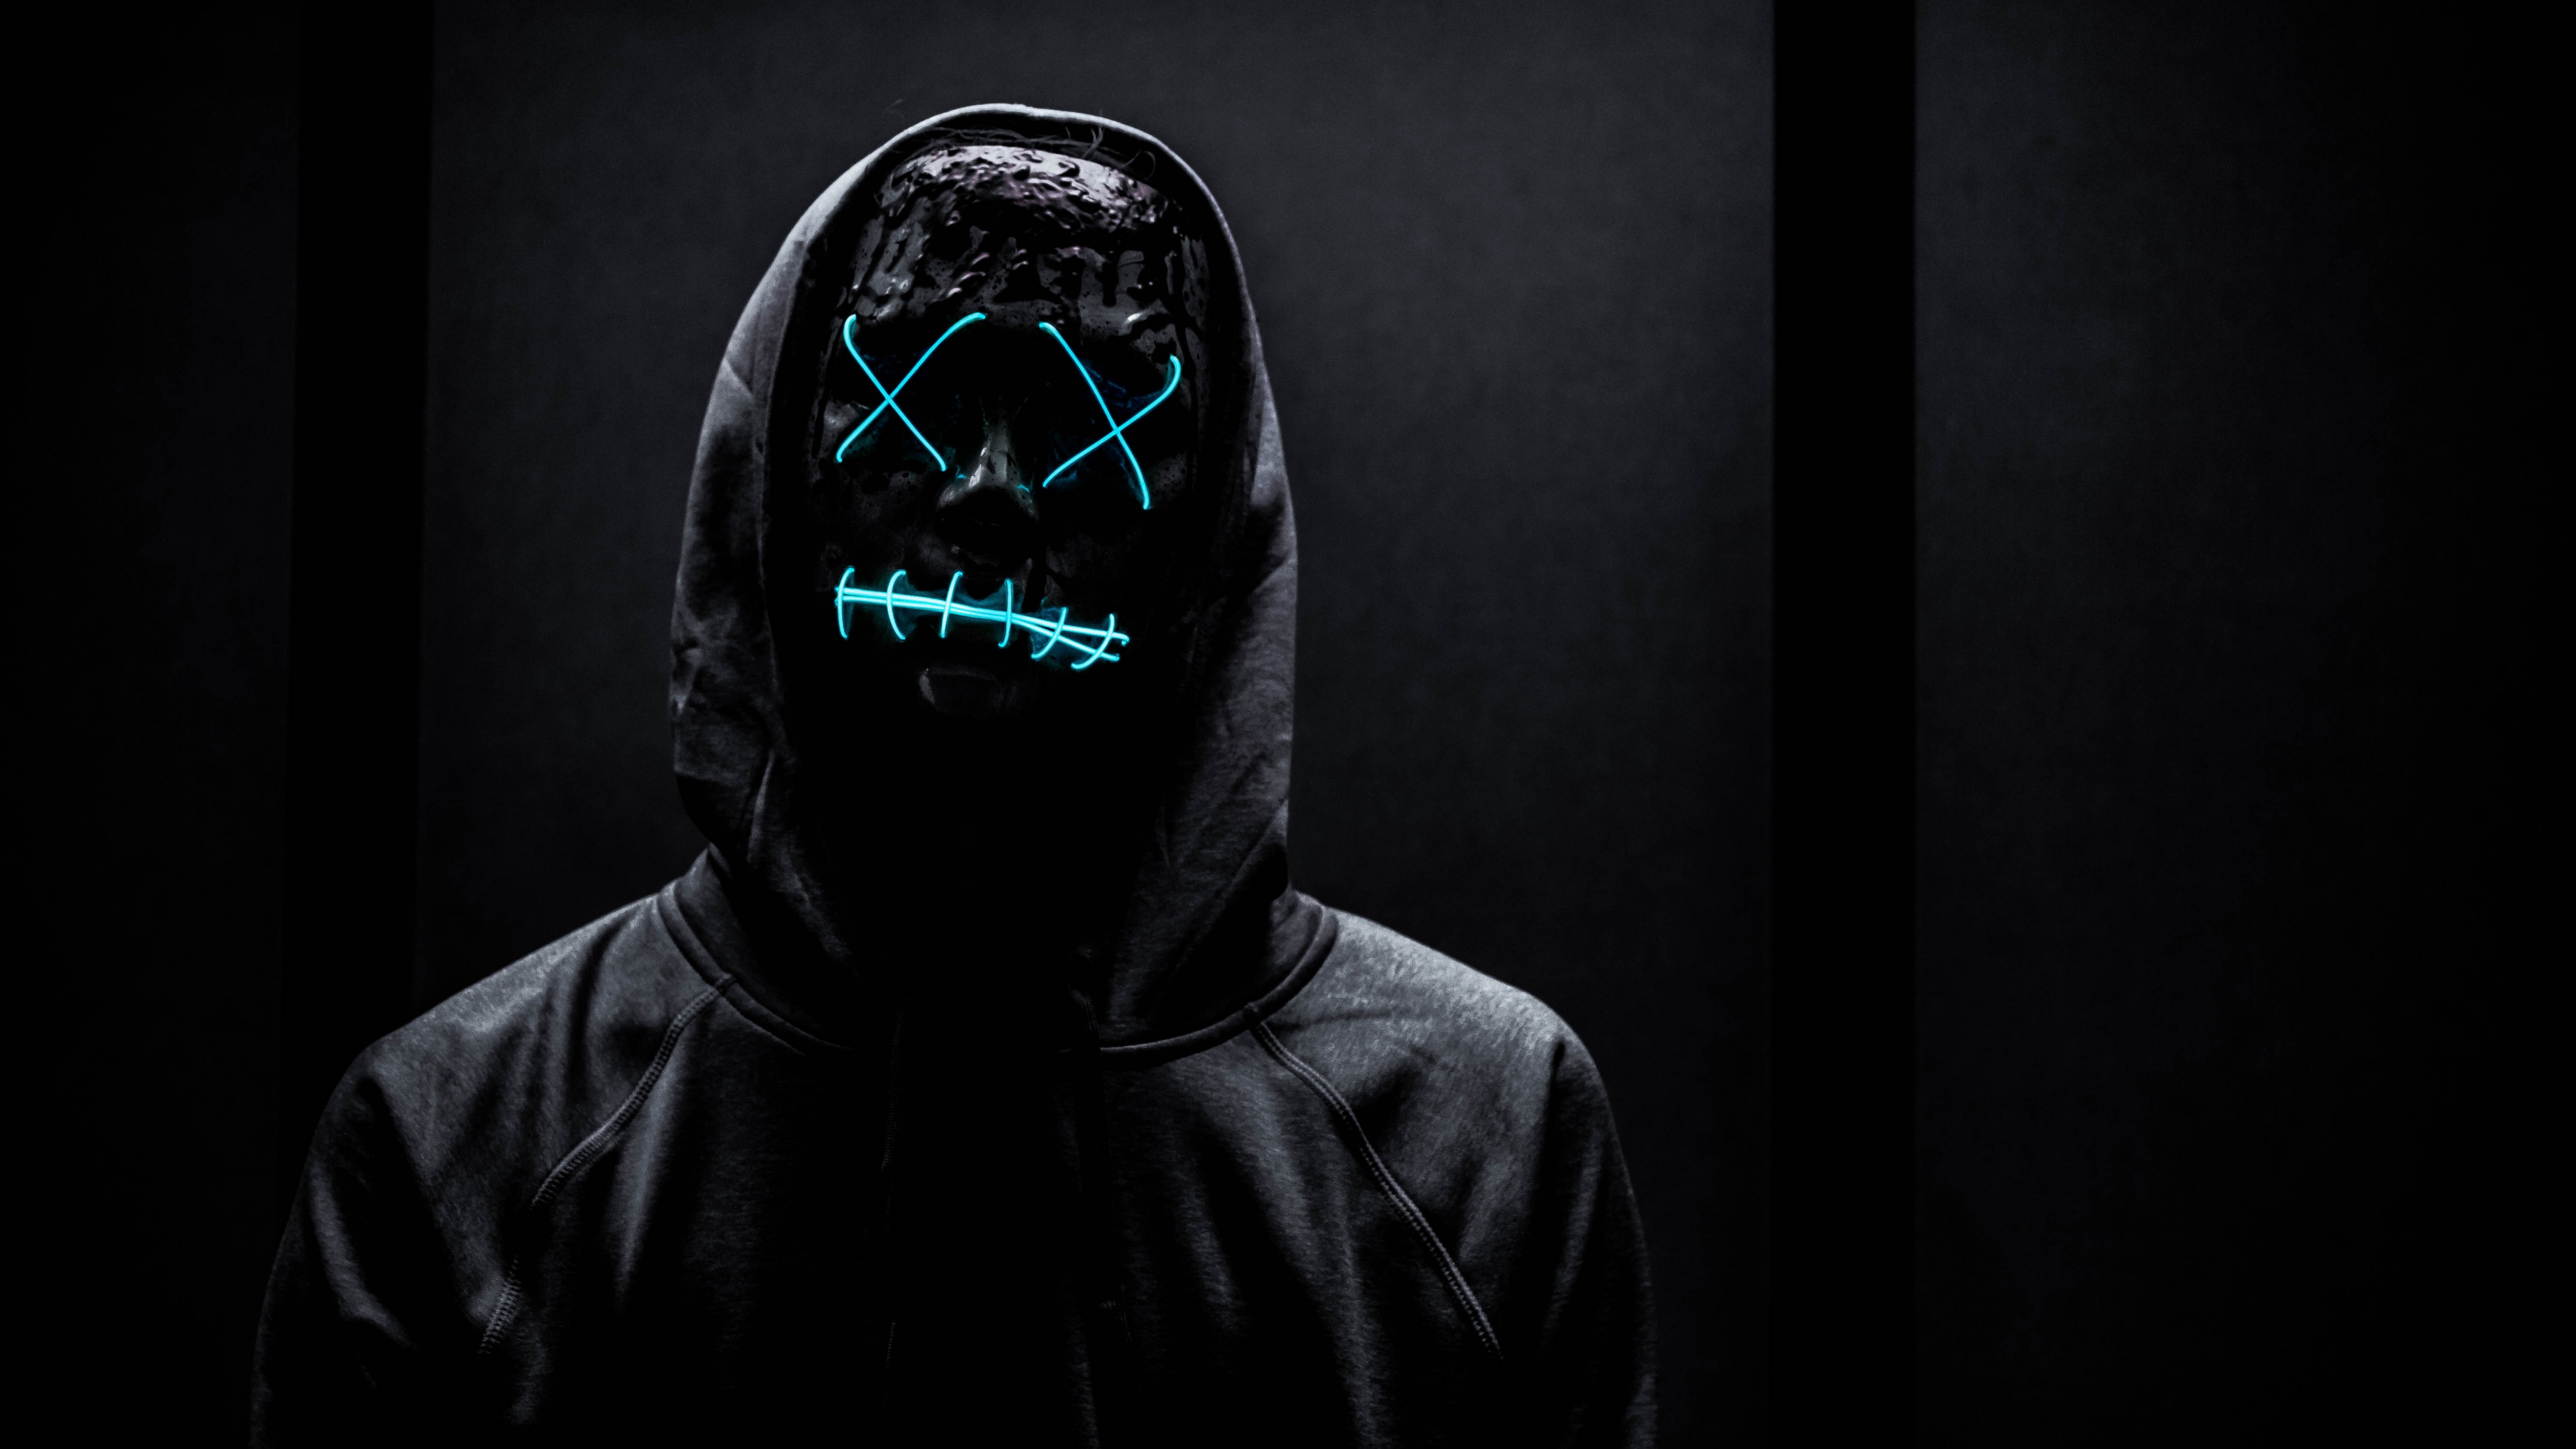 Neon Mask Wallpaper - Apps on Google Play